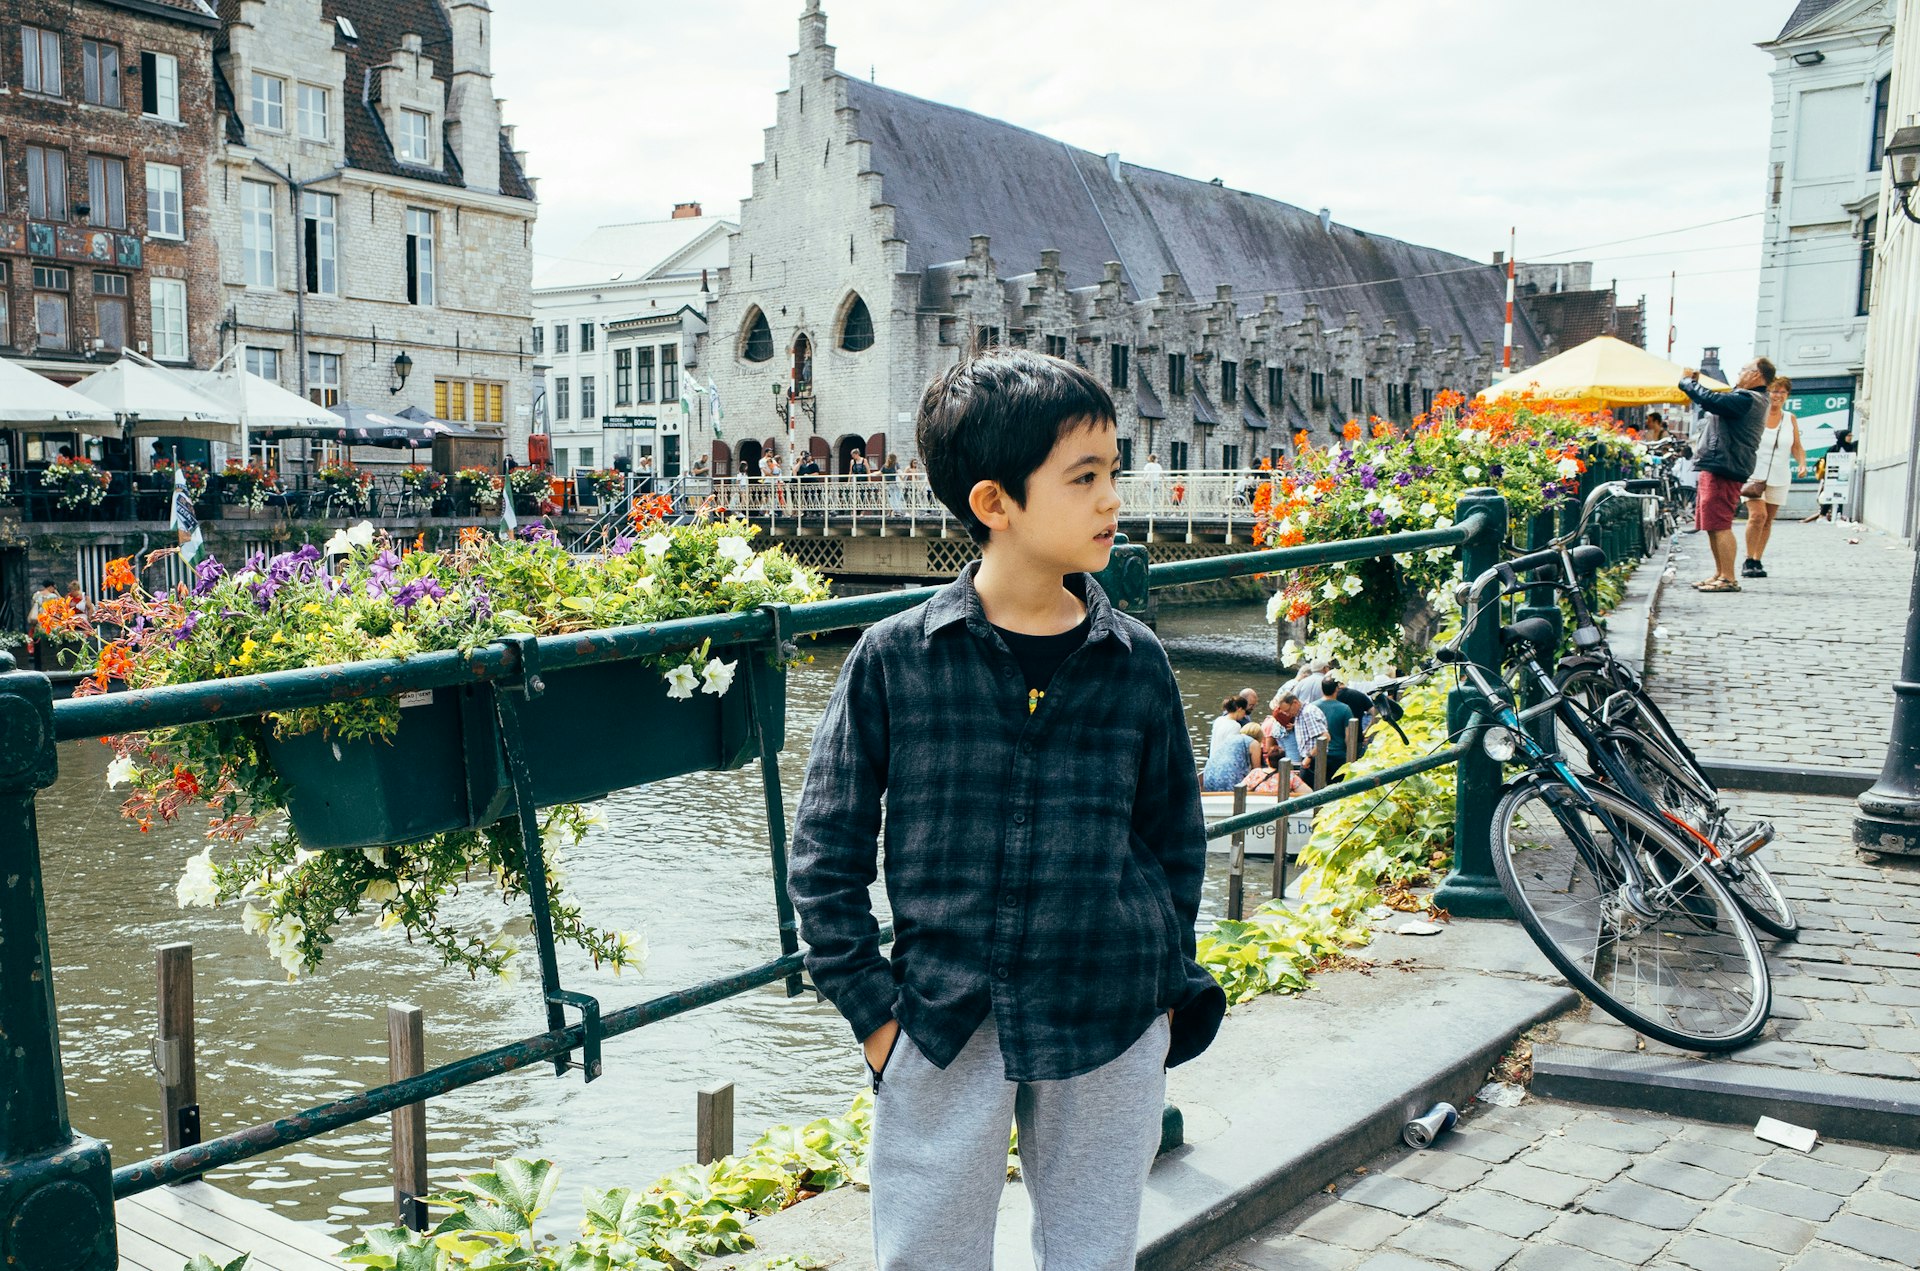 A young boy stands next to a canal in a city with medieval buildings around him